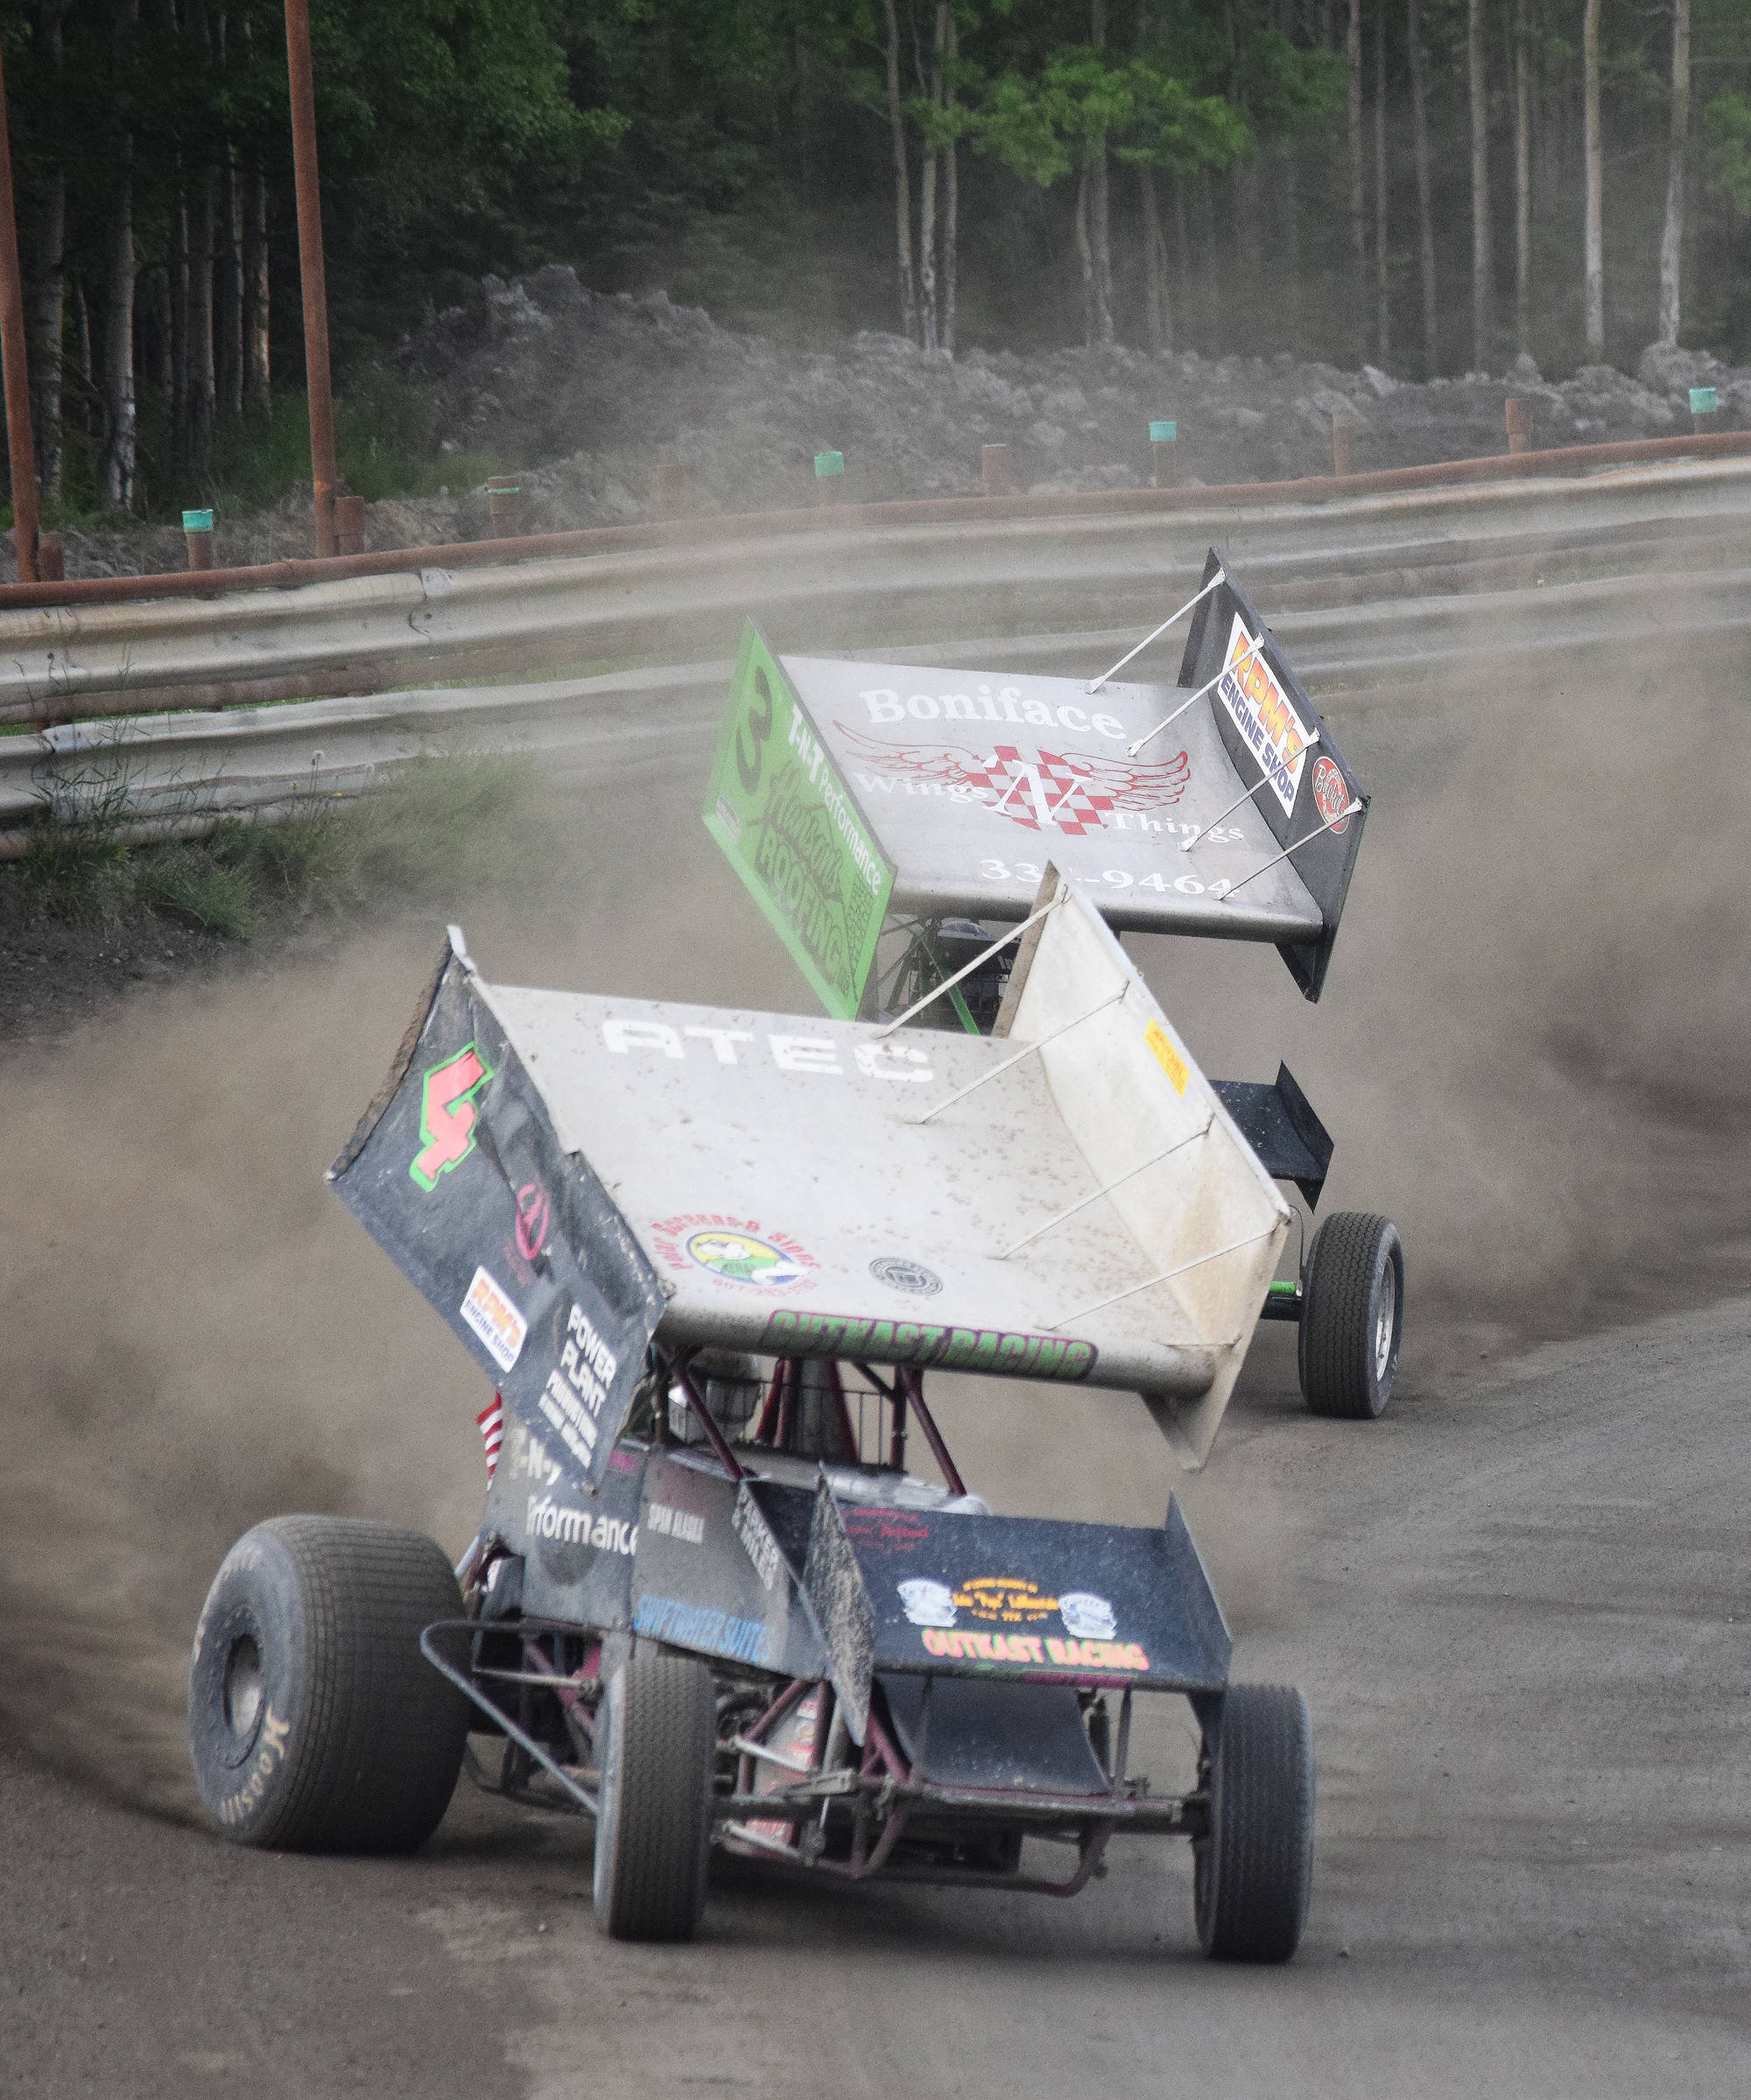 Sprint car racers slide around the turns Saturday night at Twin City Raceway in Kenai. The highlight of the weekend was the “Filthy Fifty” feature race Saturday night, which pitted A- and B-Stock racers against each other for 50 laps. Racing resumes today at 1 p.m. (Photo by Joey Klecka/Peninsula Clarion)